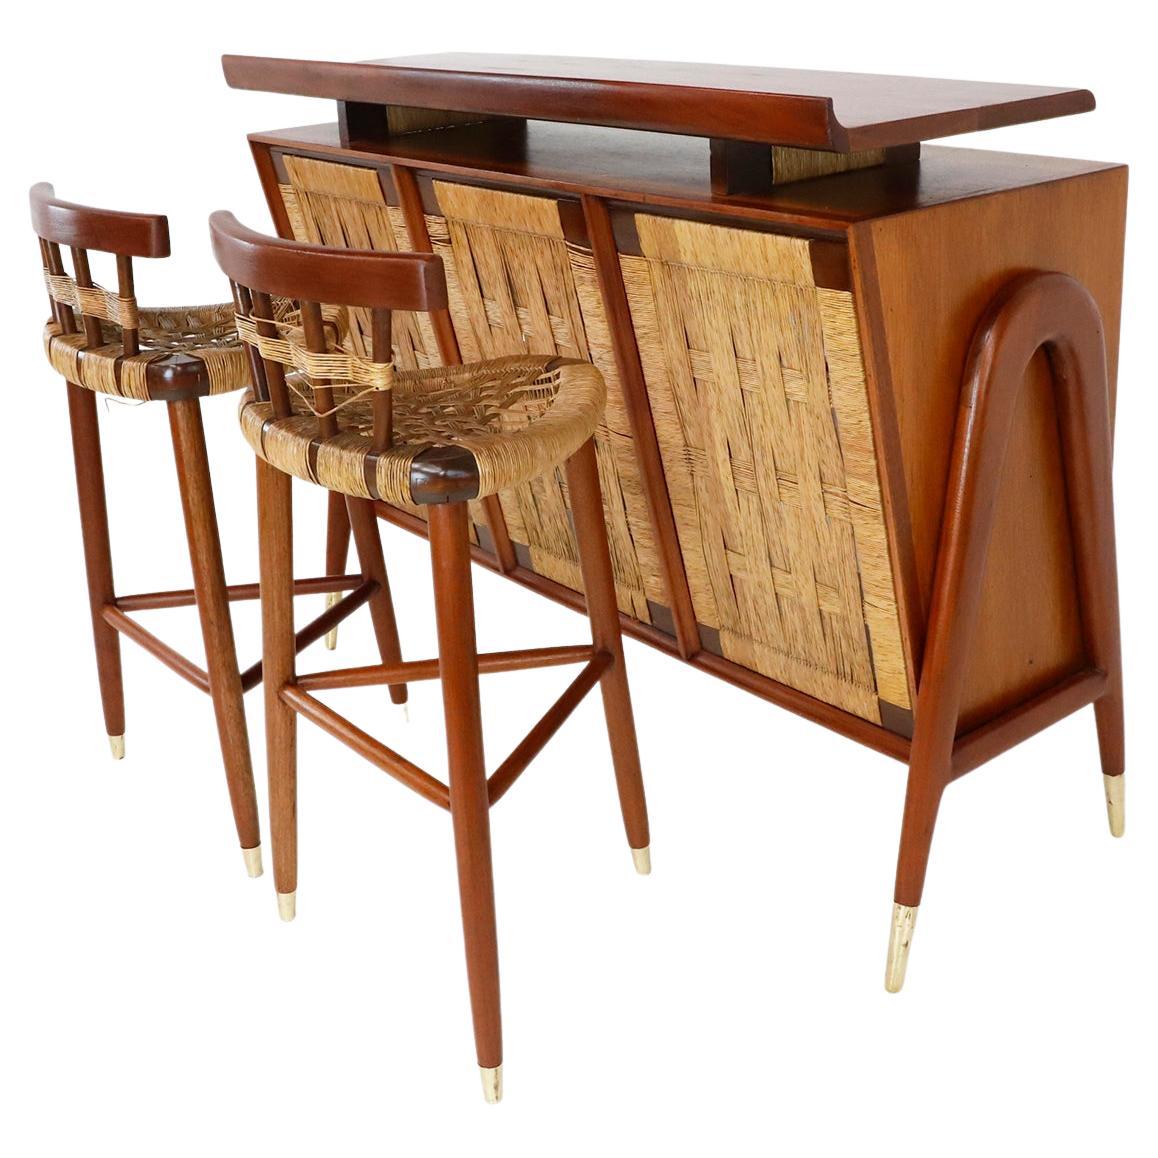 Rare Mid Century Mexican Woven Bar and Stools Set, Attributed to Edmund Spence